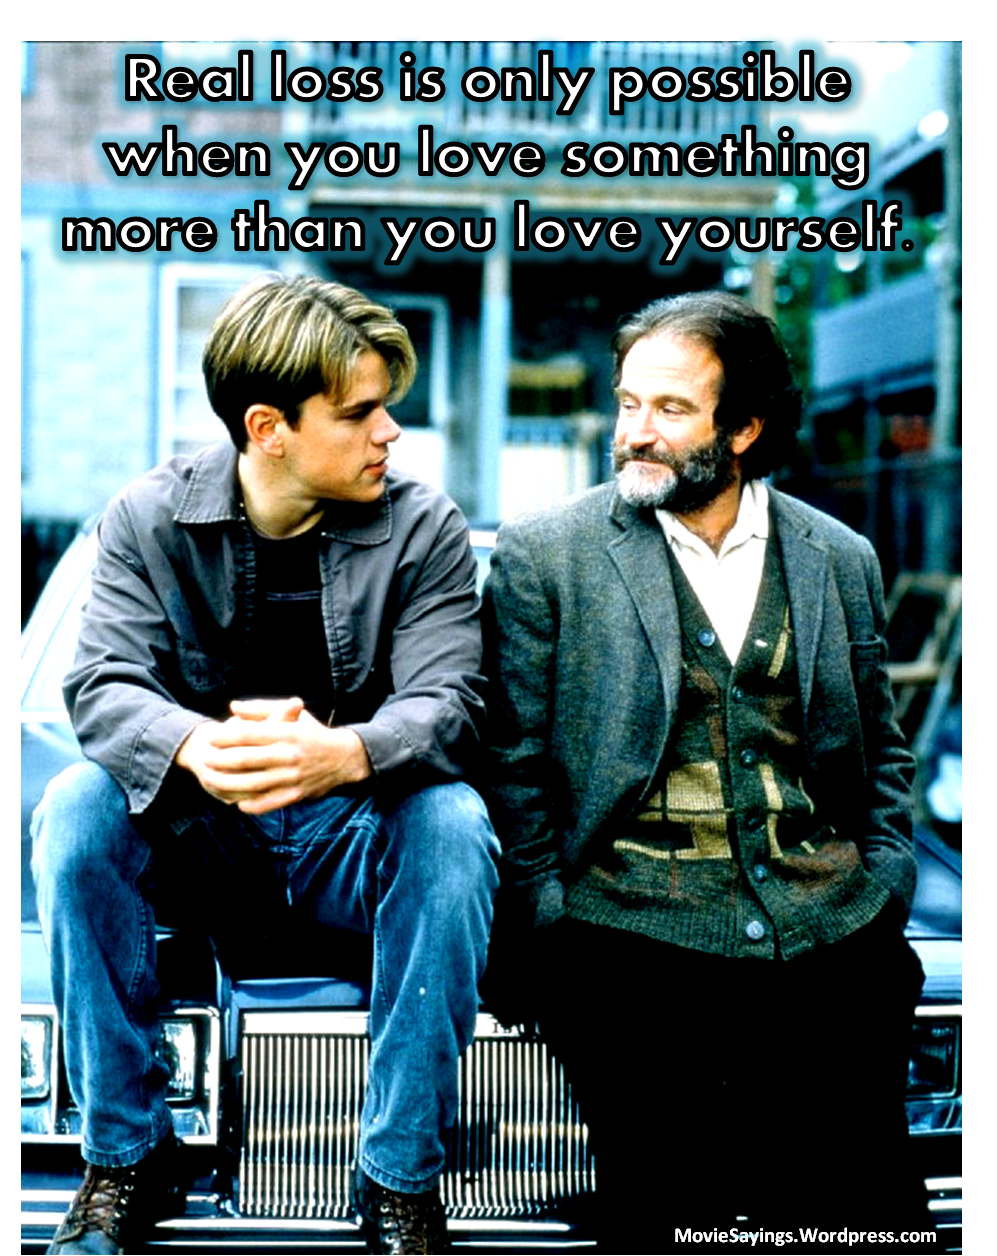 Sean Real loss is only possible when you love something more than you love yourself Robin Williams – Good Will Hunting